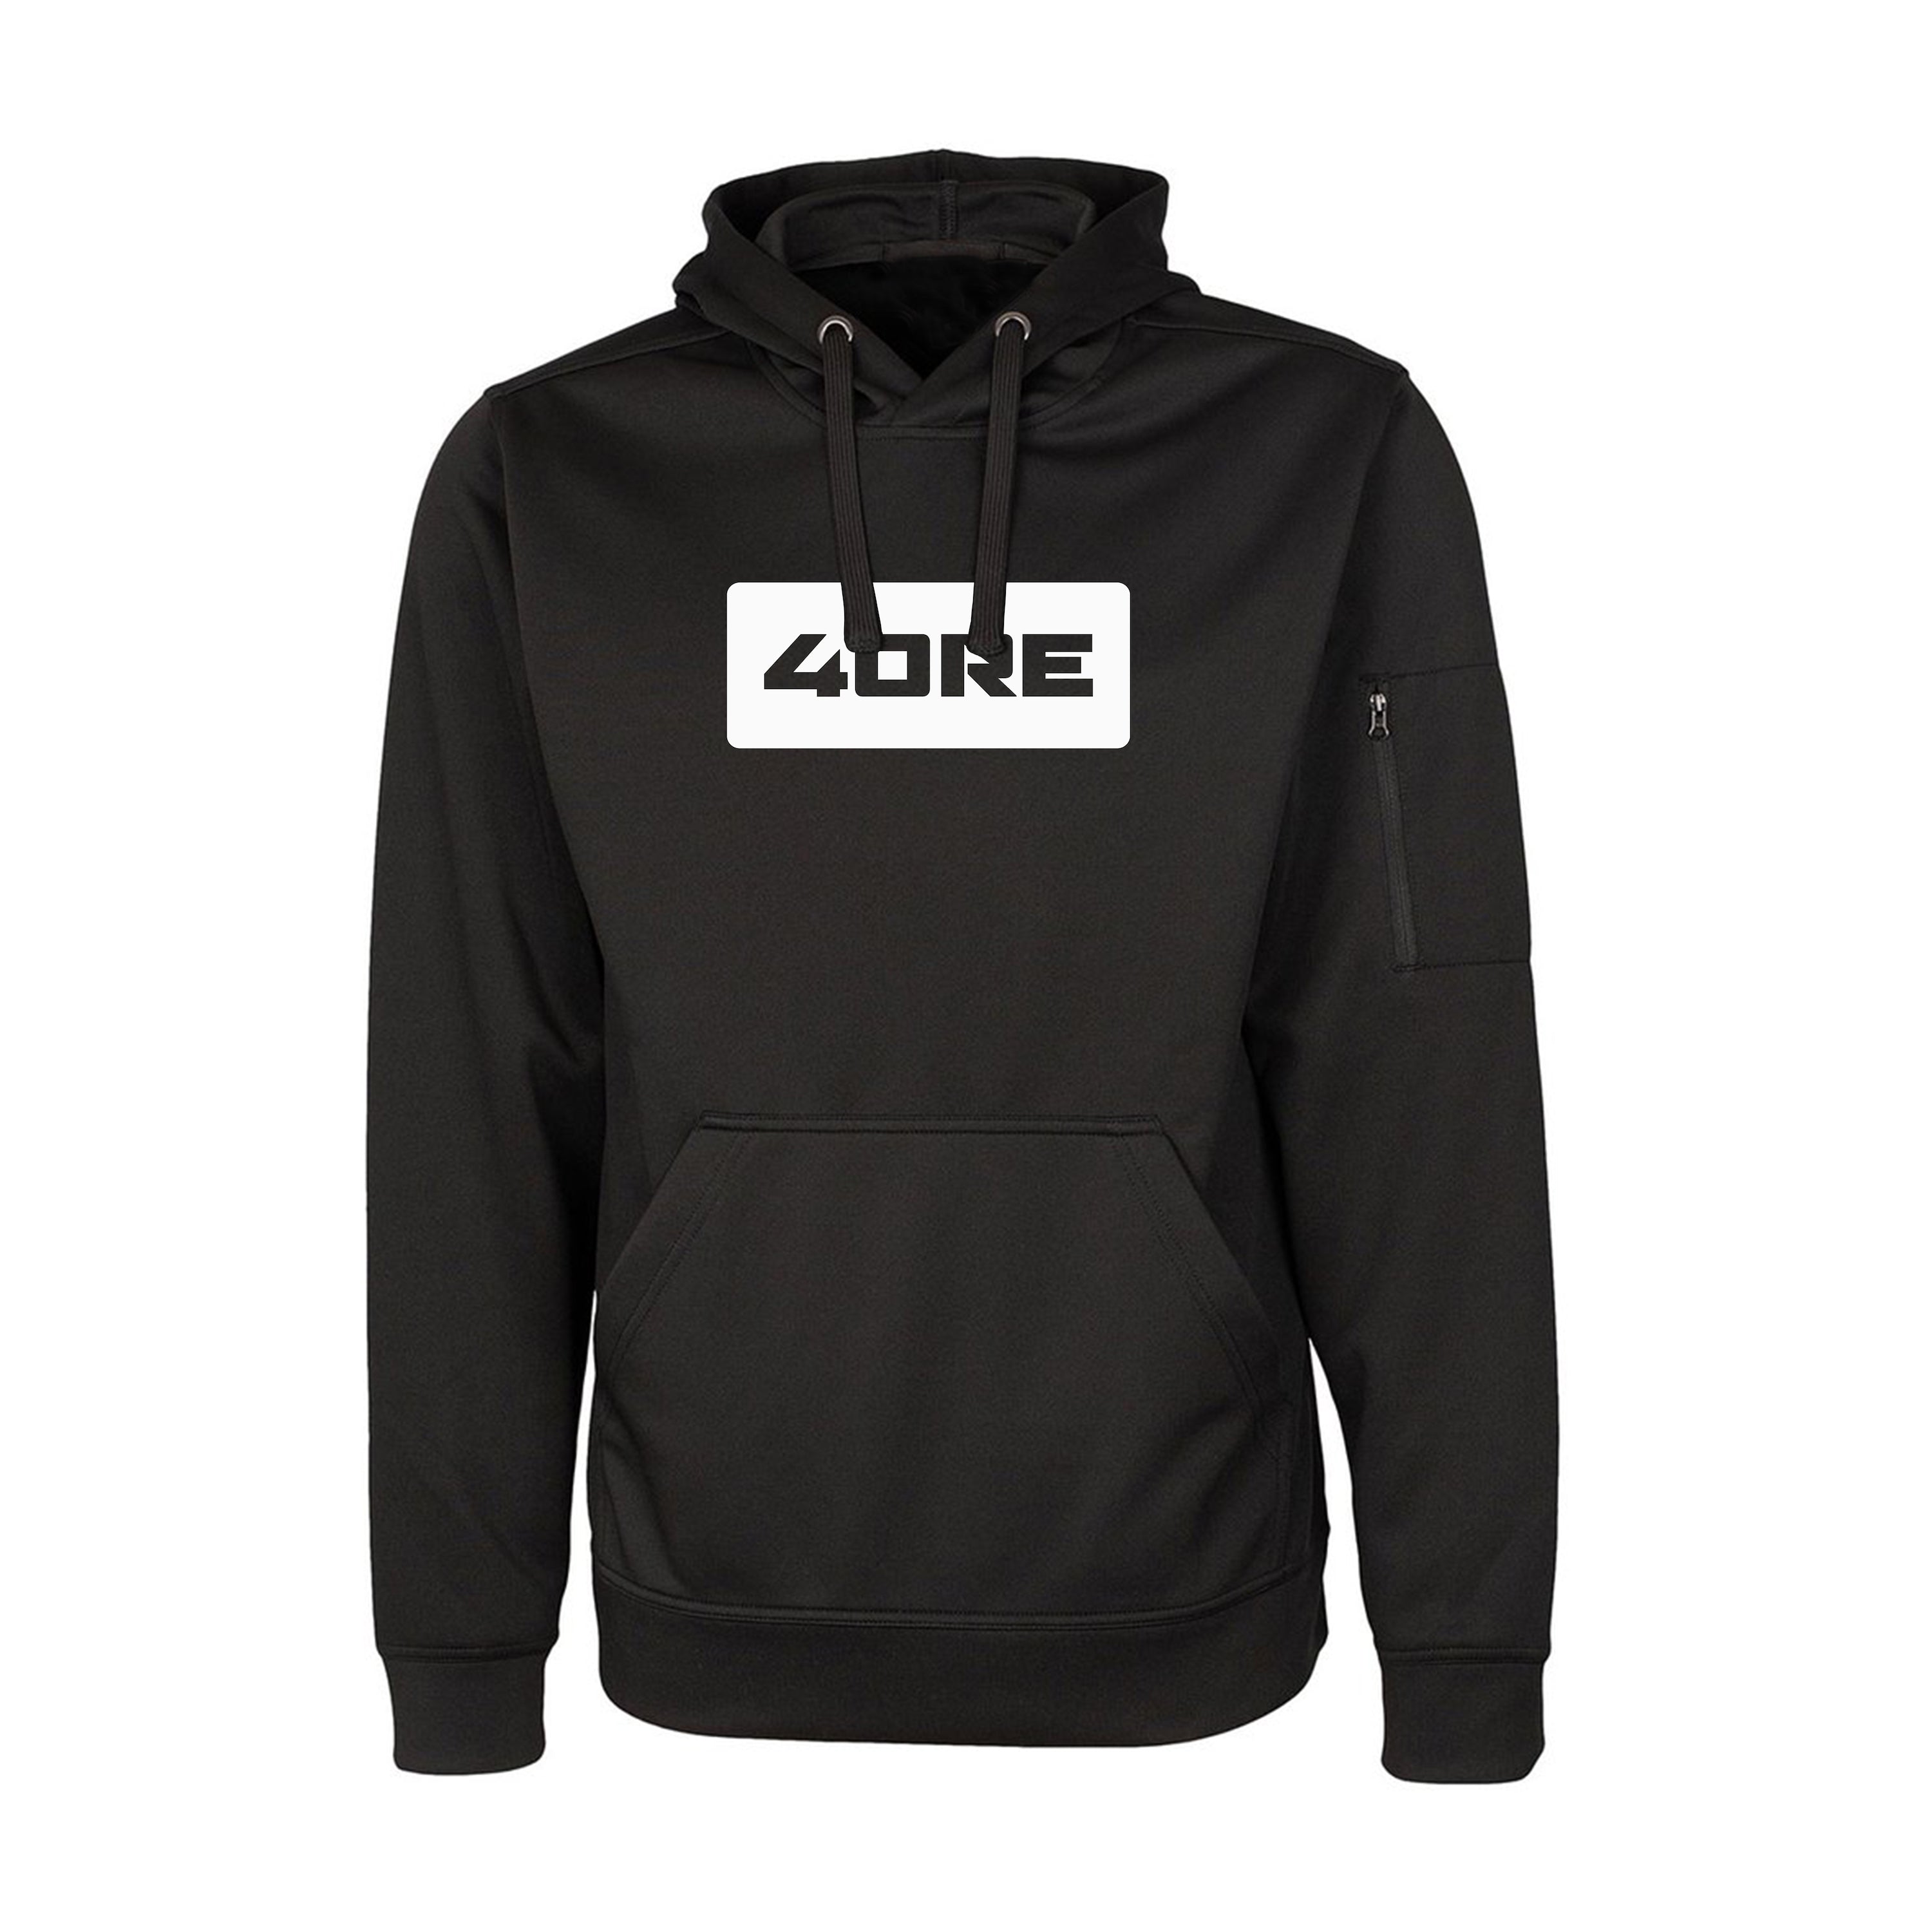 4ORE TOUR HOODIE [BLACK] LIMITED EDITION – 4ORE NUTRITION